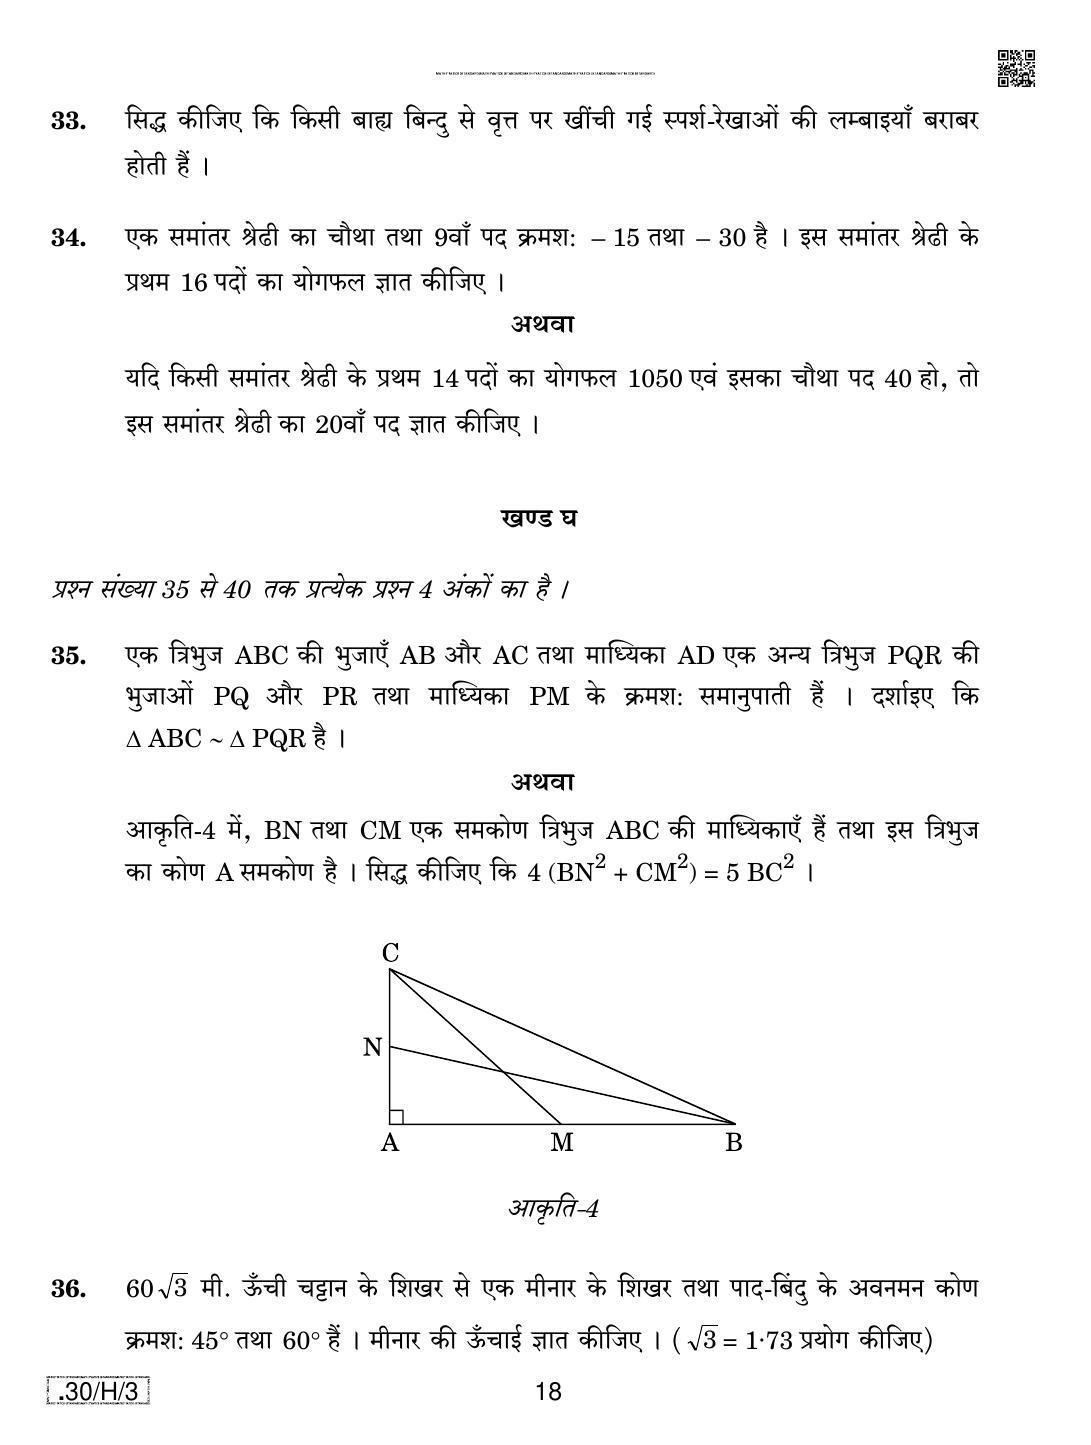 CBSE Class 10 30-C-3 - Maths (Standard) 2020 Compartment Question Paper - Page 18